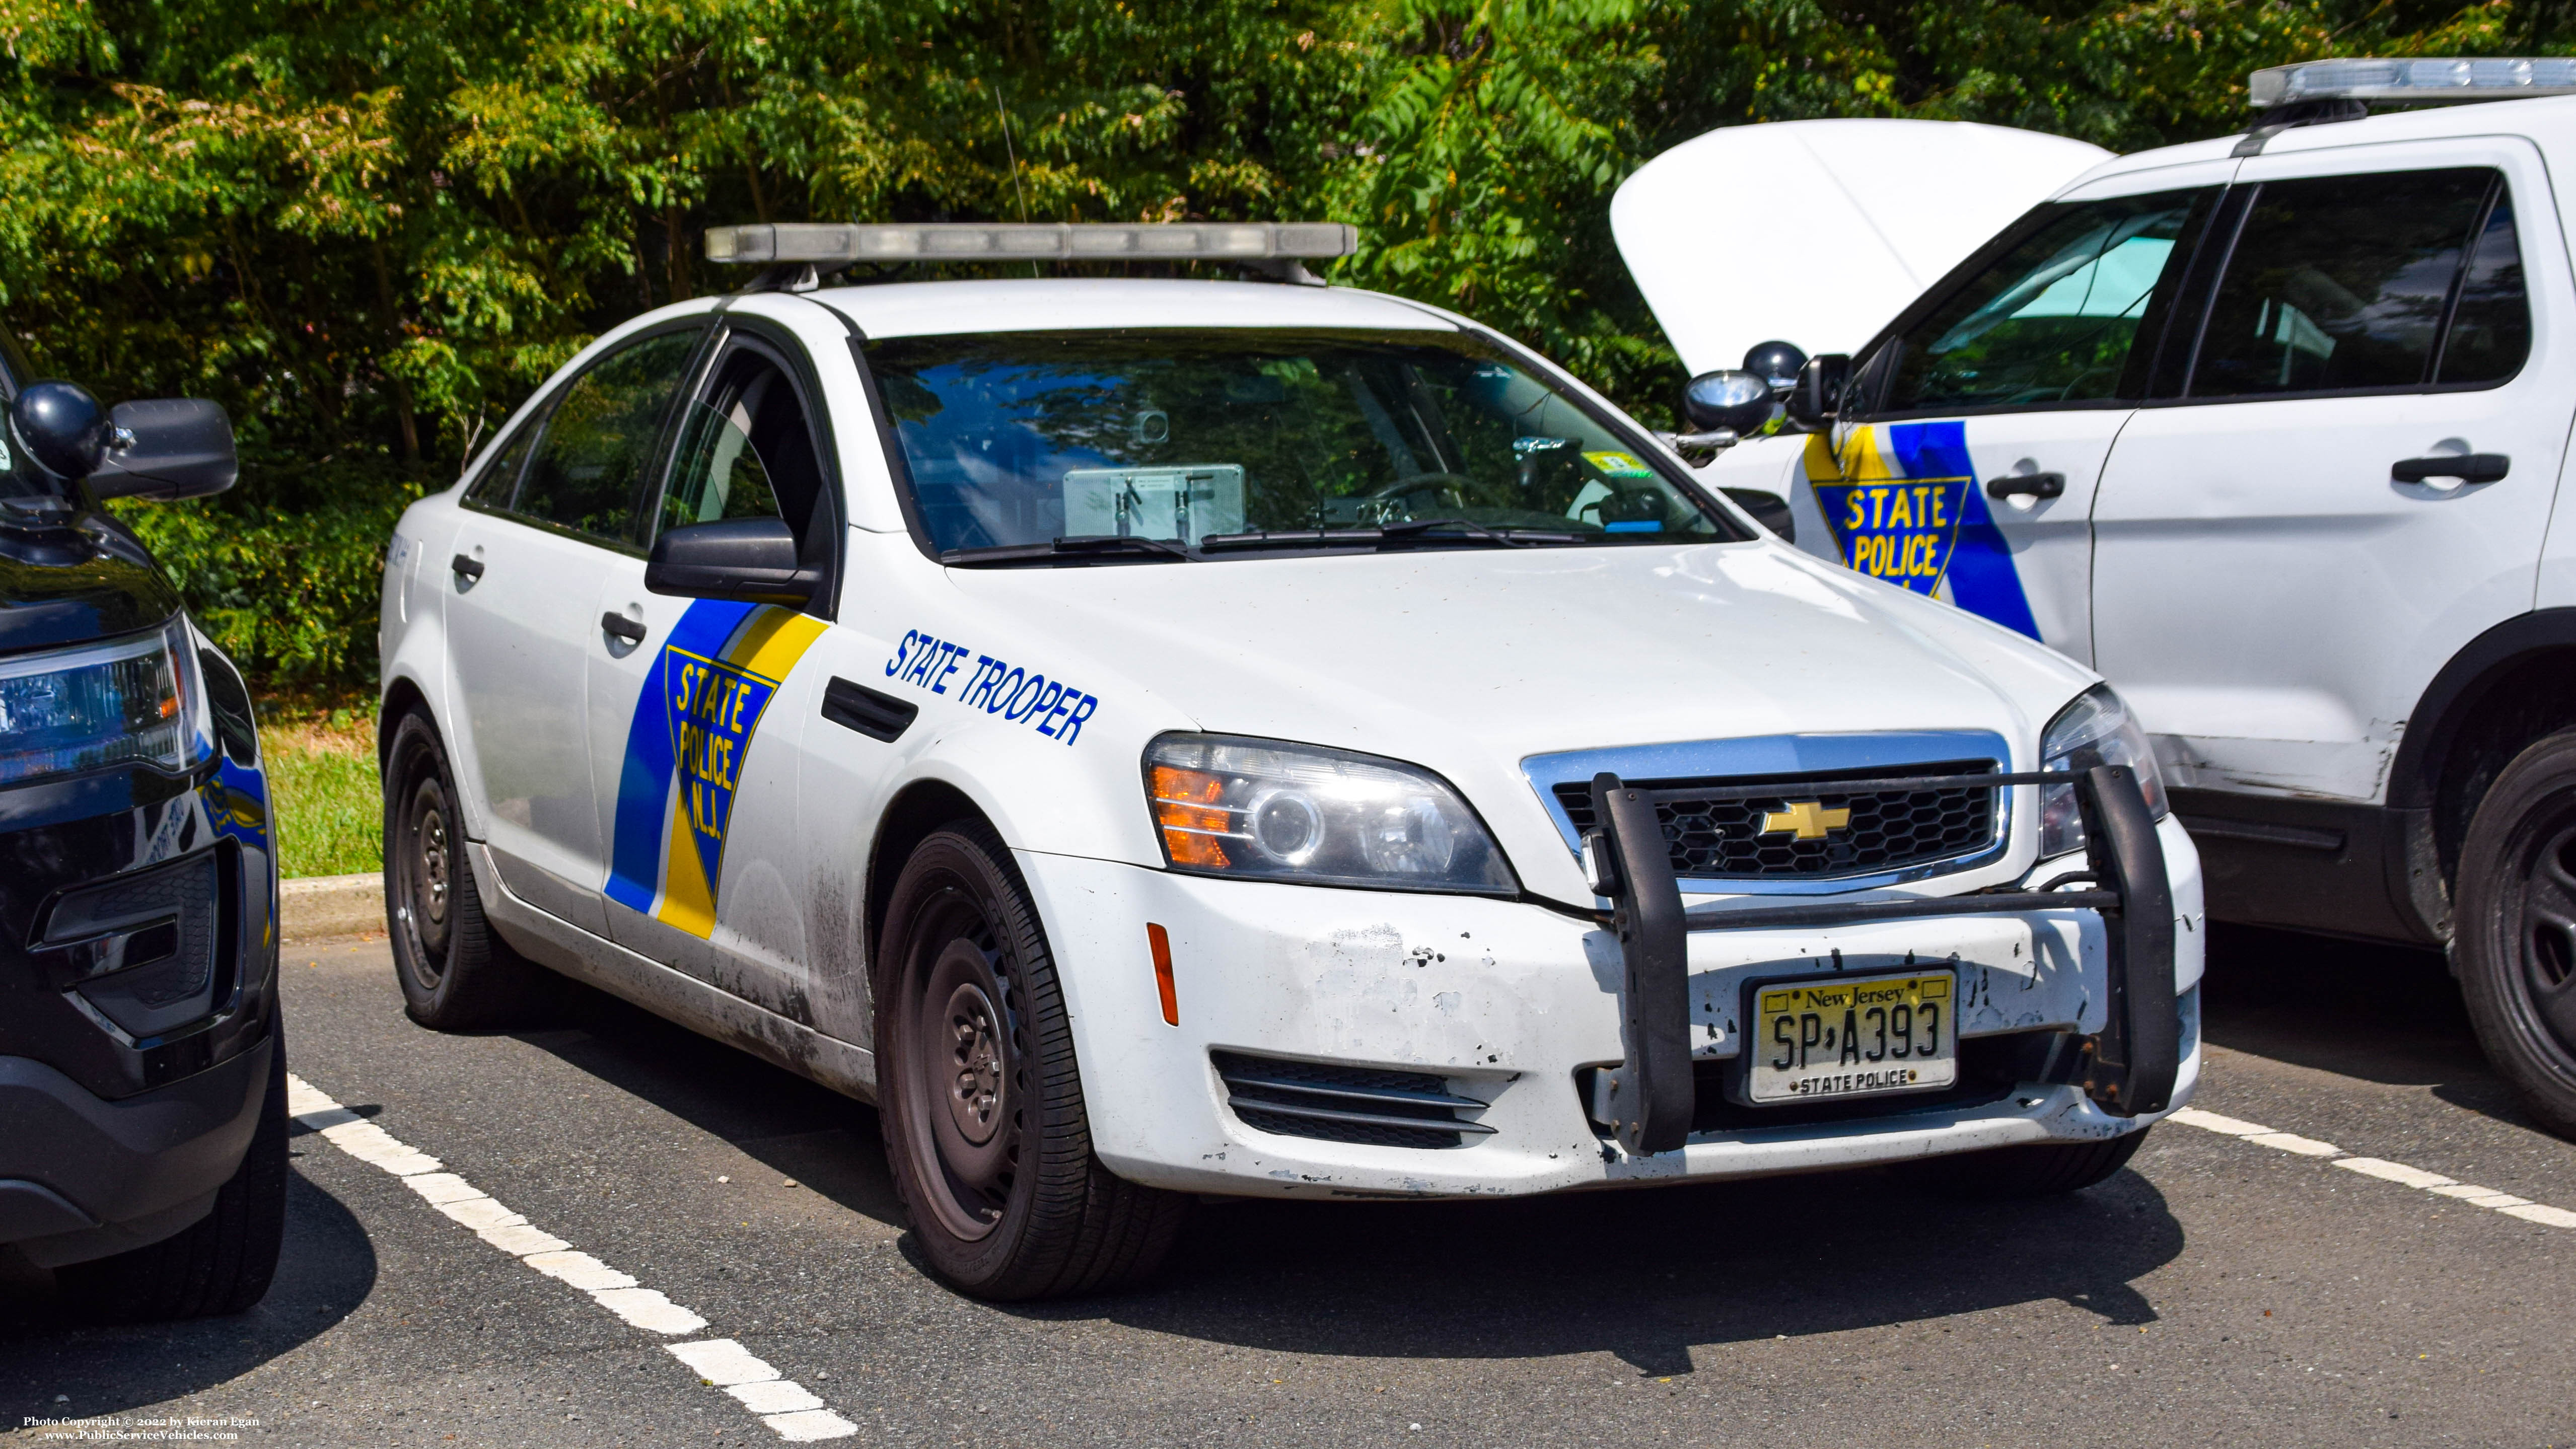 A photo  of New Jersey State Police
            Cruiser 393, a 2014 Chevrolet Caprice             taken by Kieran Egan